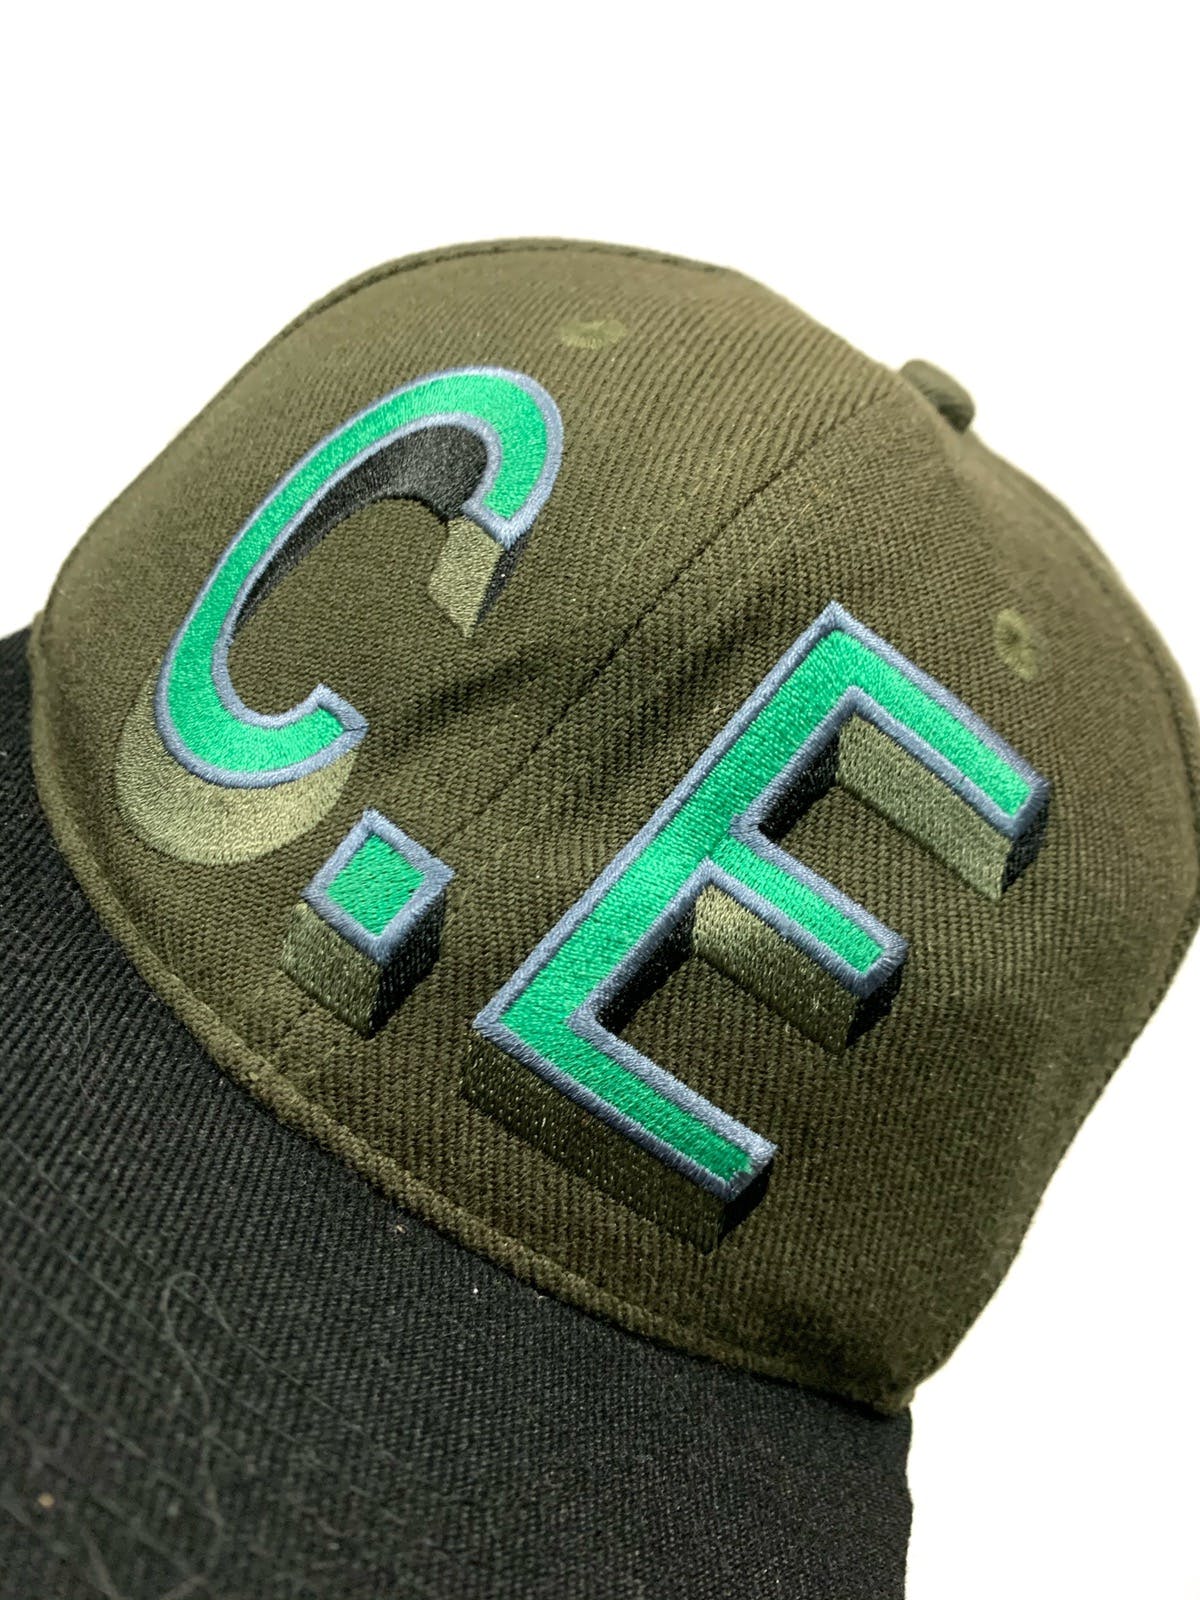 Cav empt leather stripe capp embroidery - 3